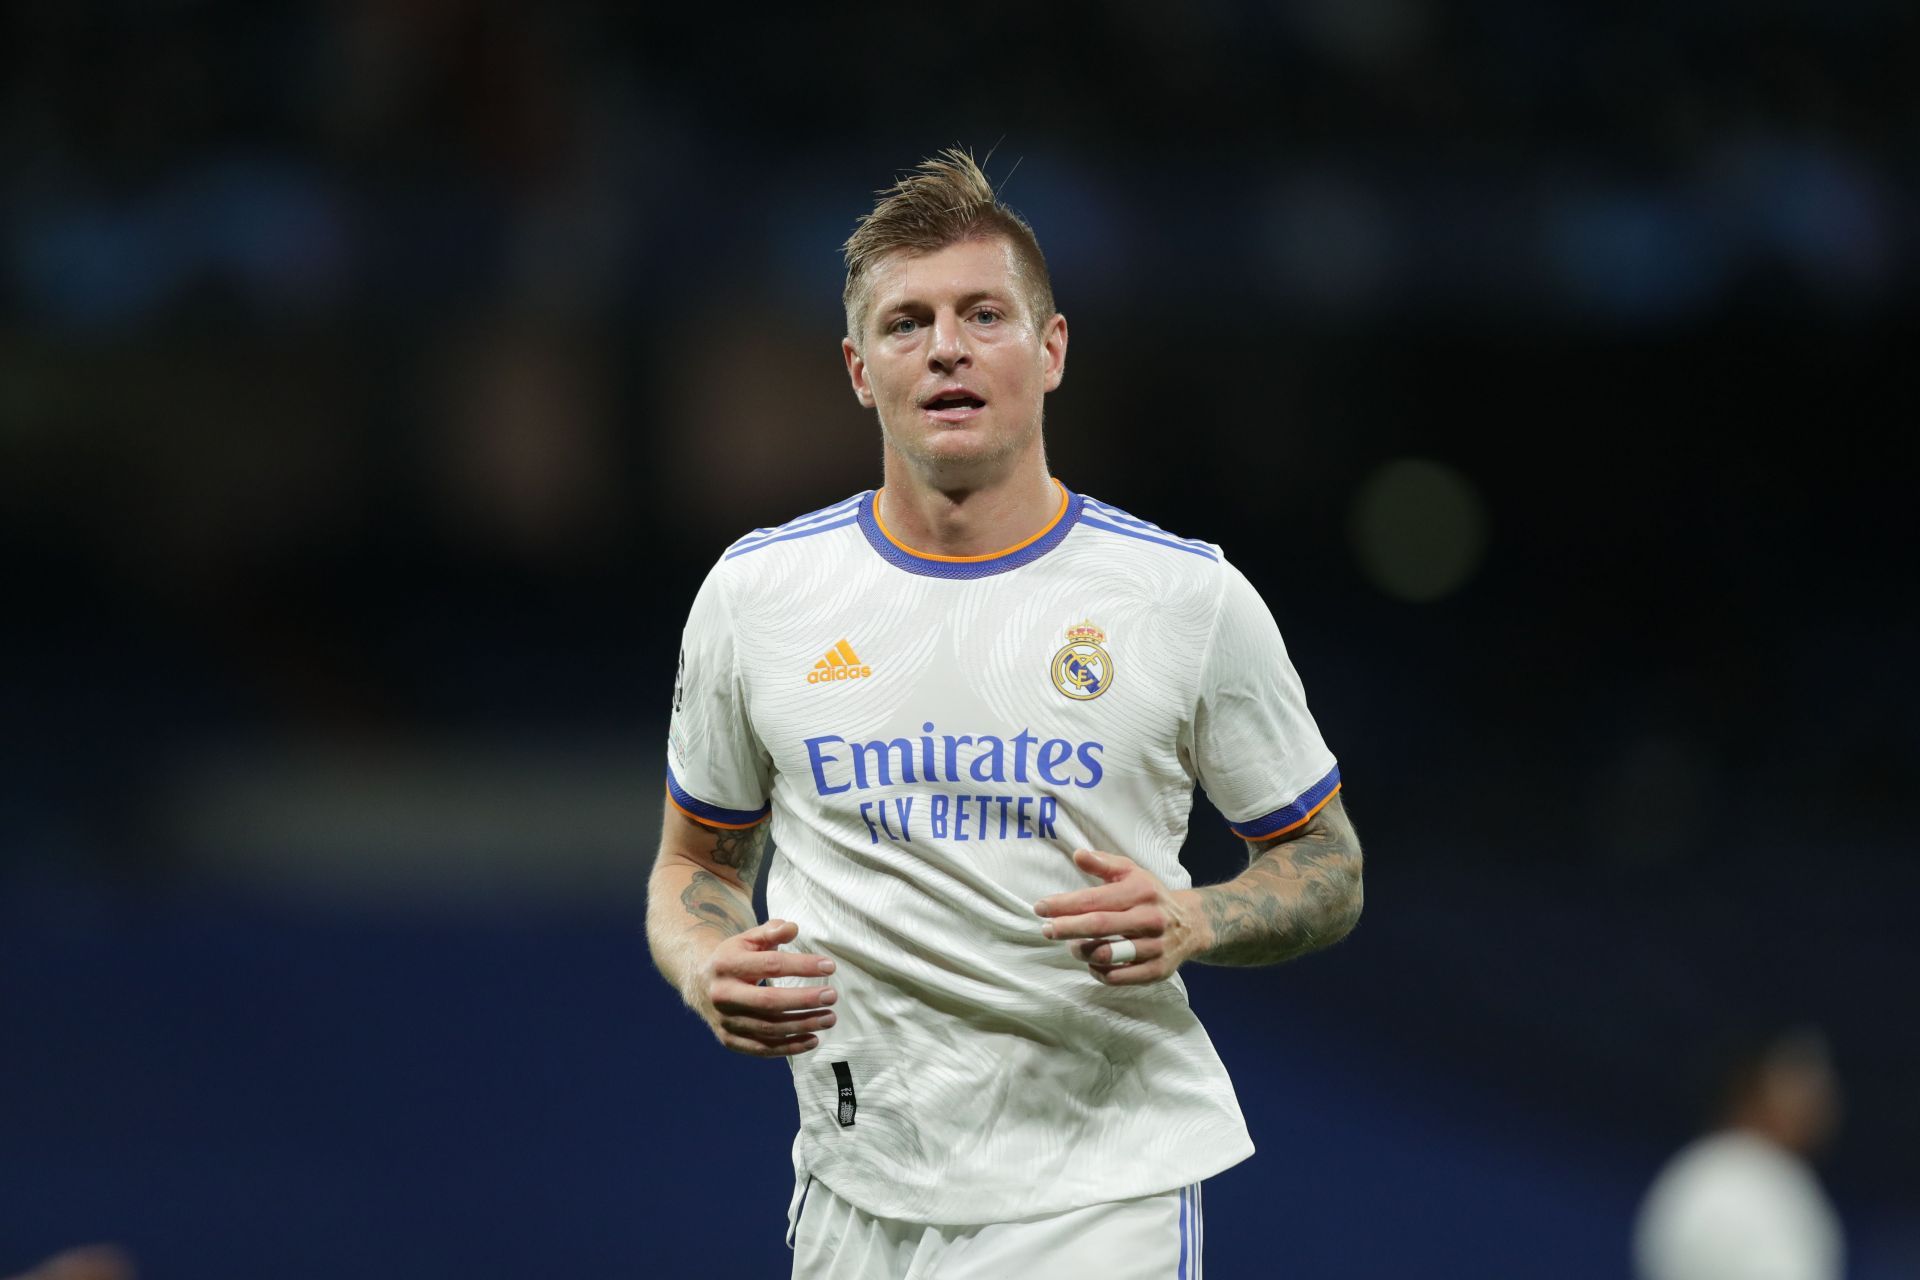 Toni Kroos has been one of the best passers in world football over the last decade